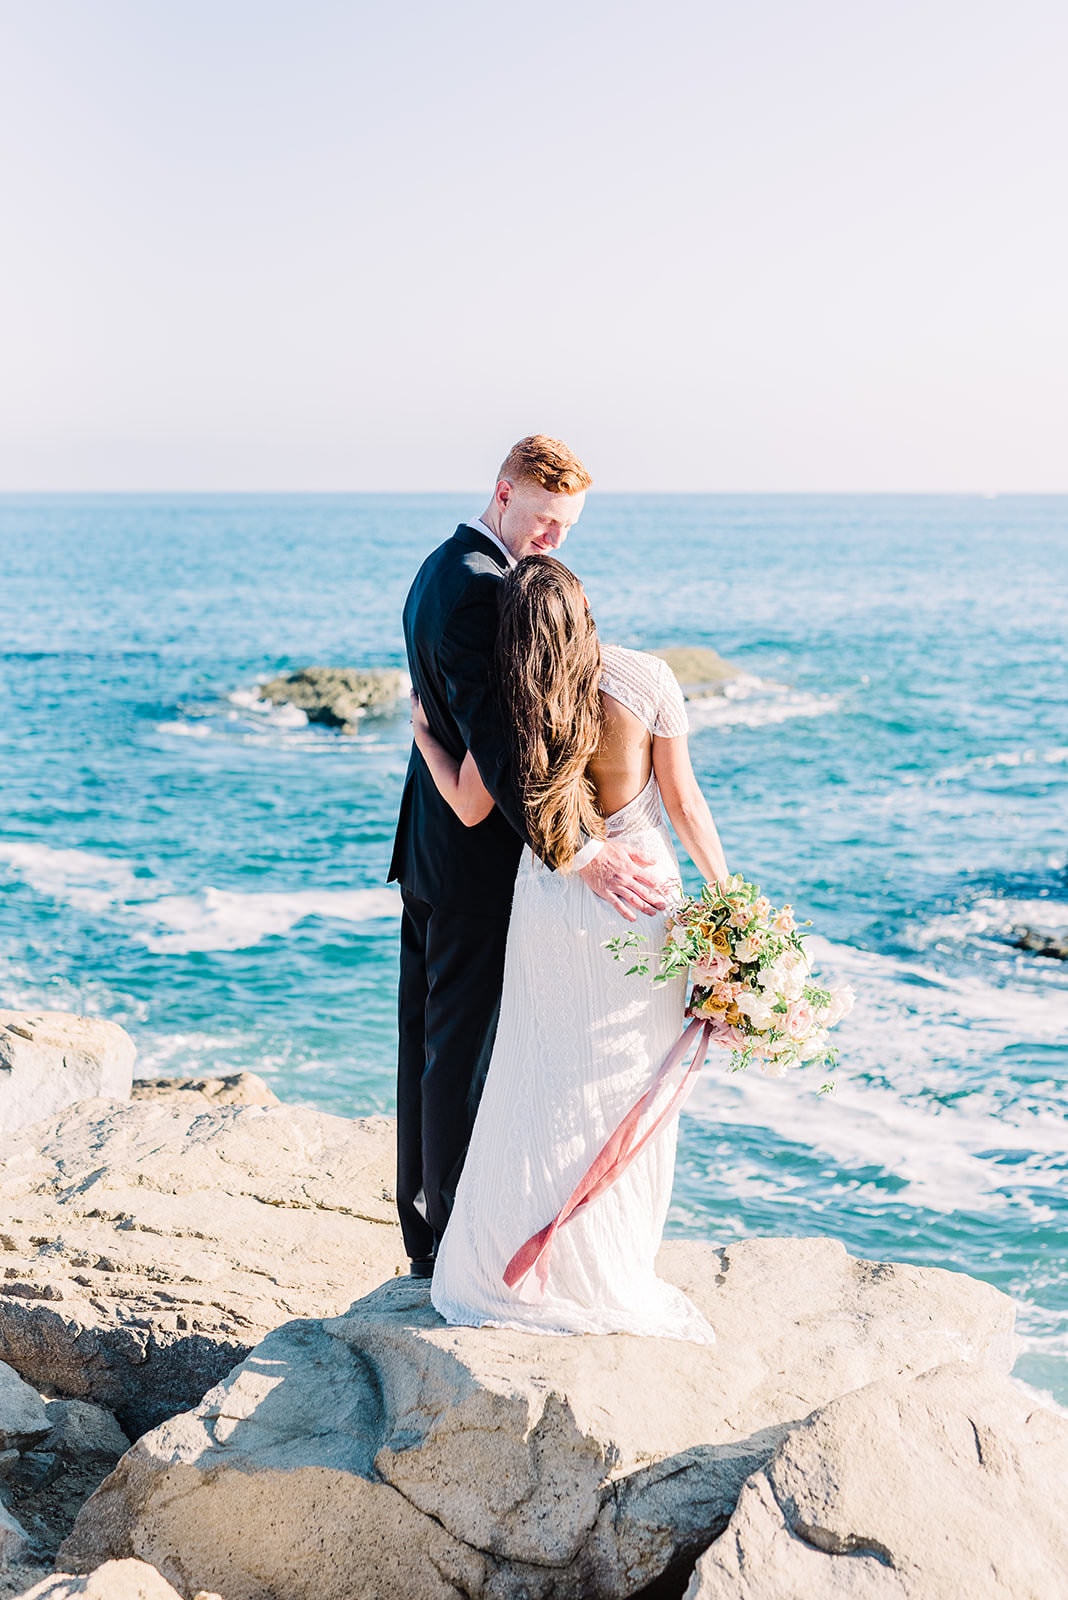 couple taking a moment together on wedding day by ocean